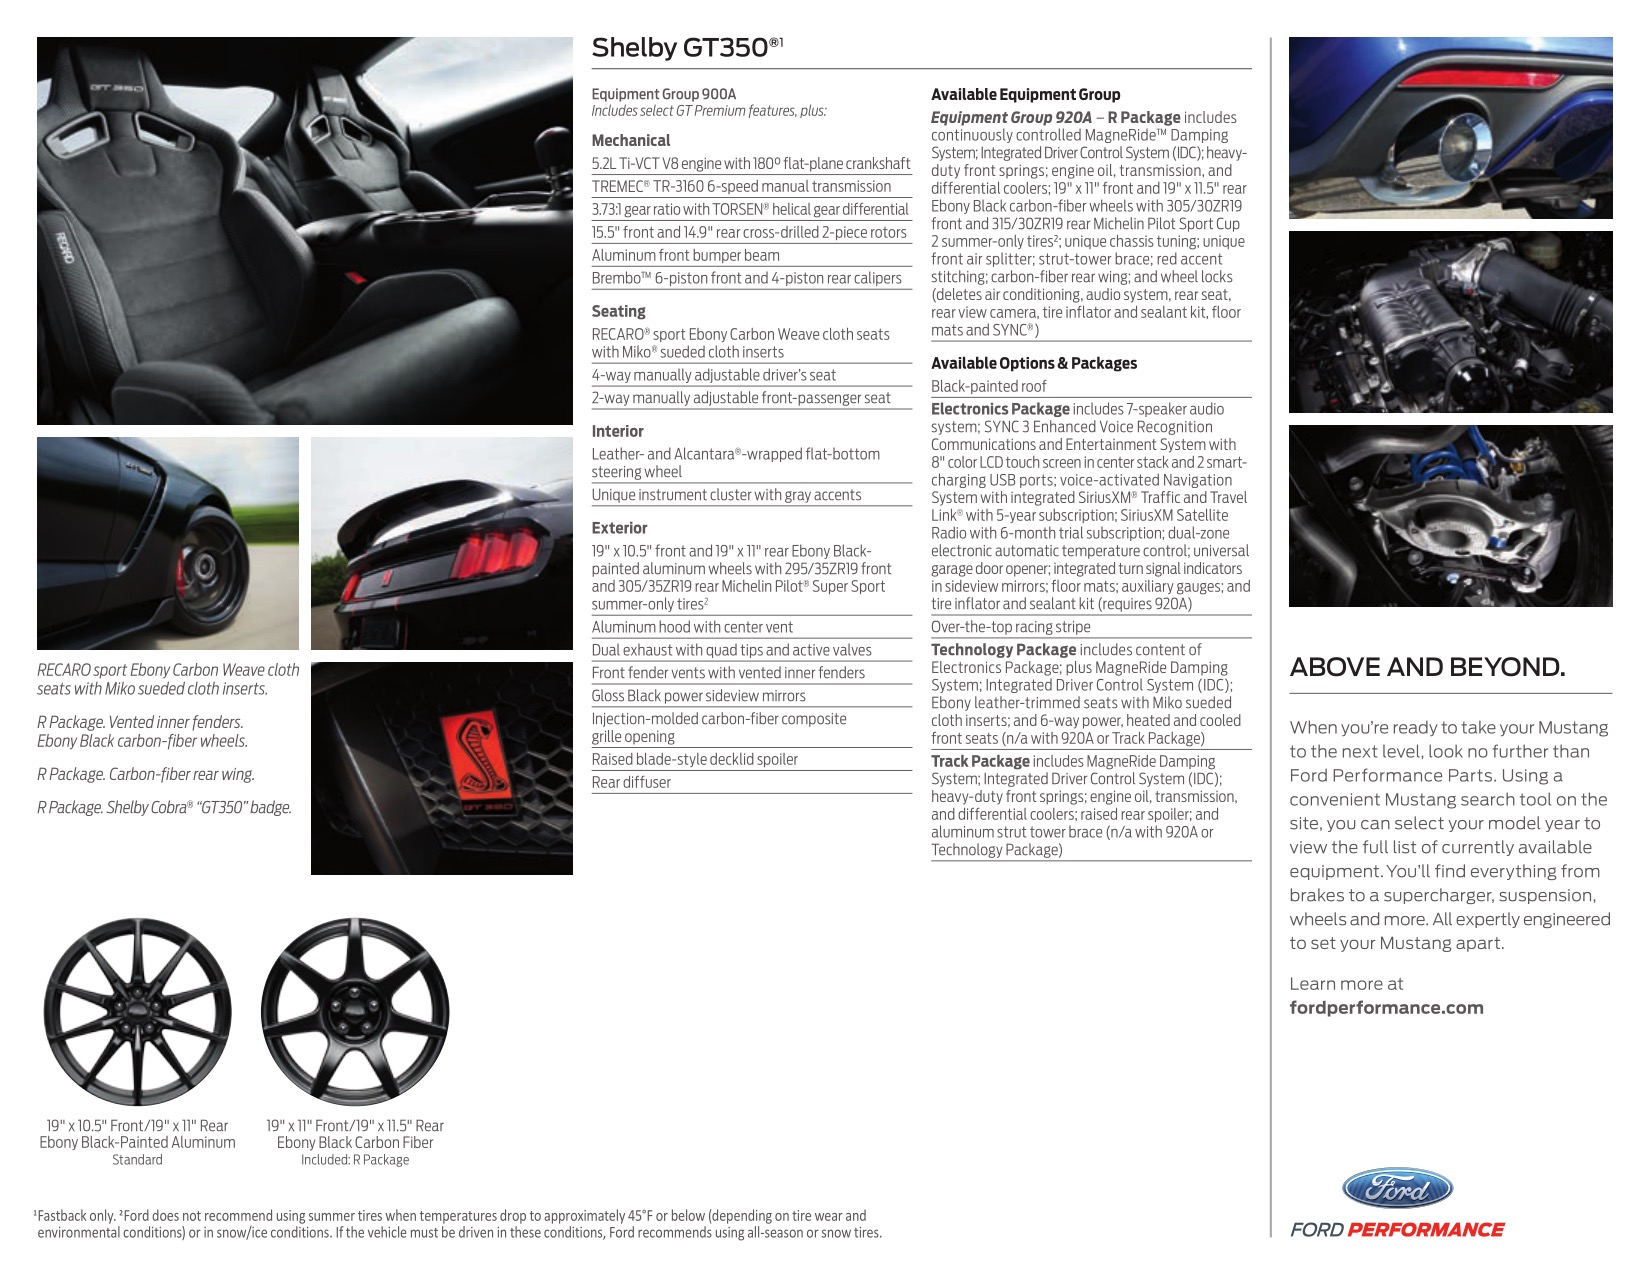 2016 Ford Mustang Brochure Page 13